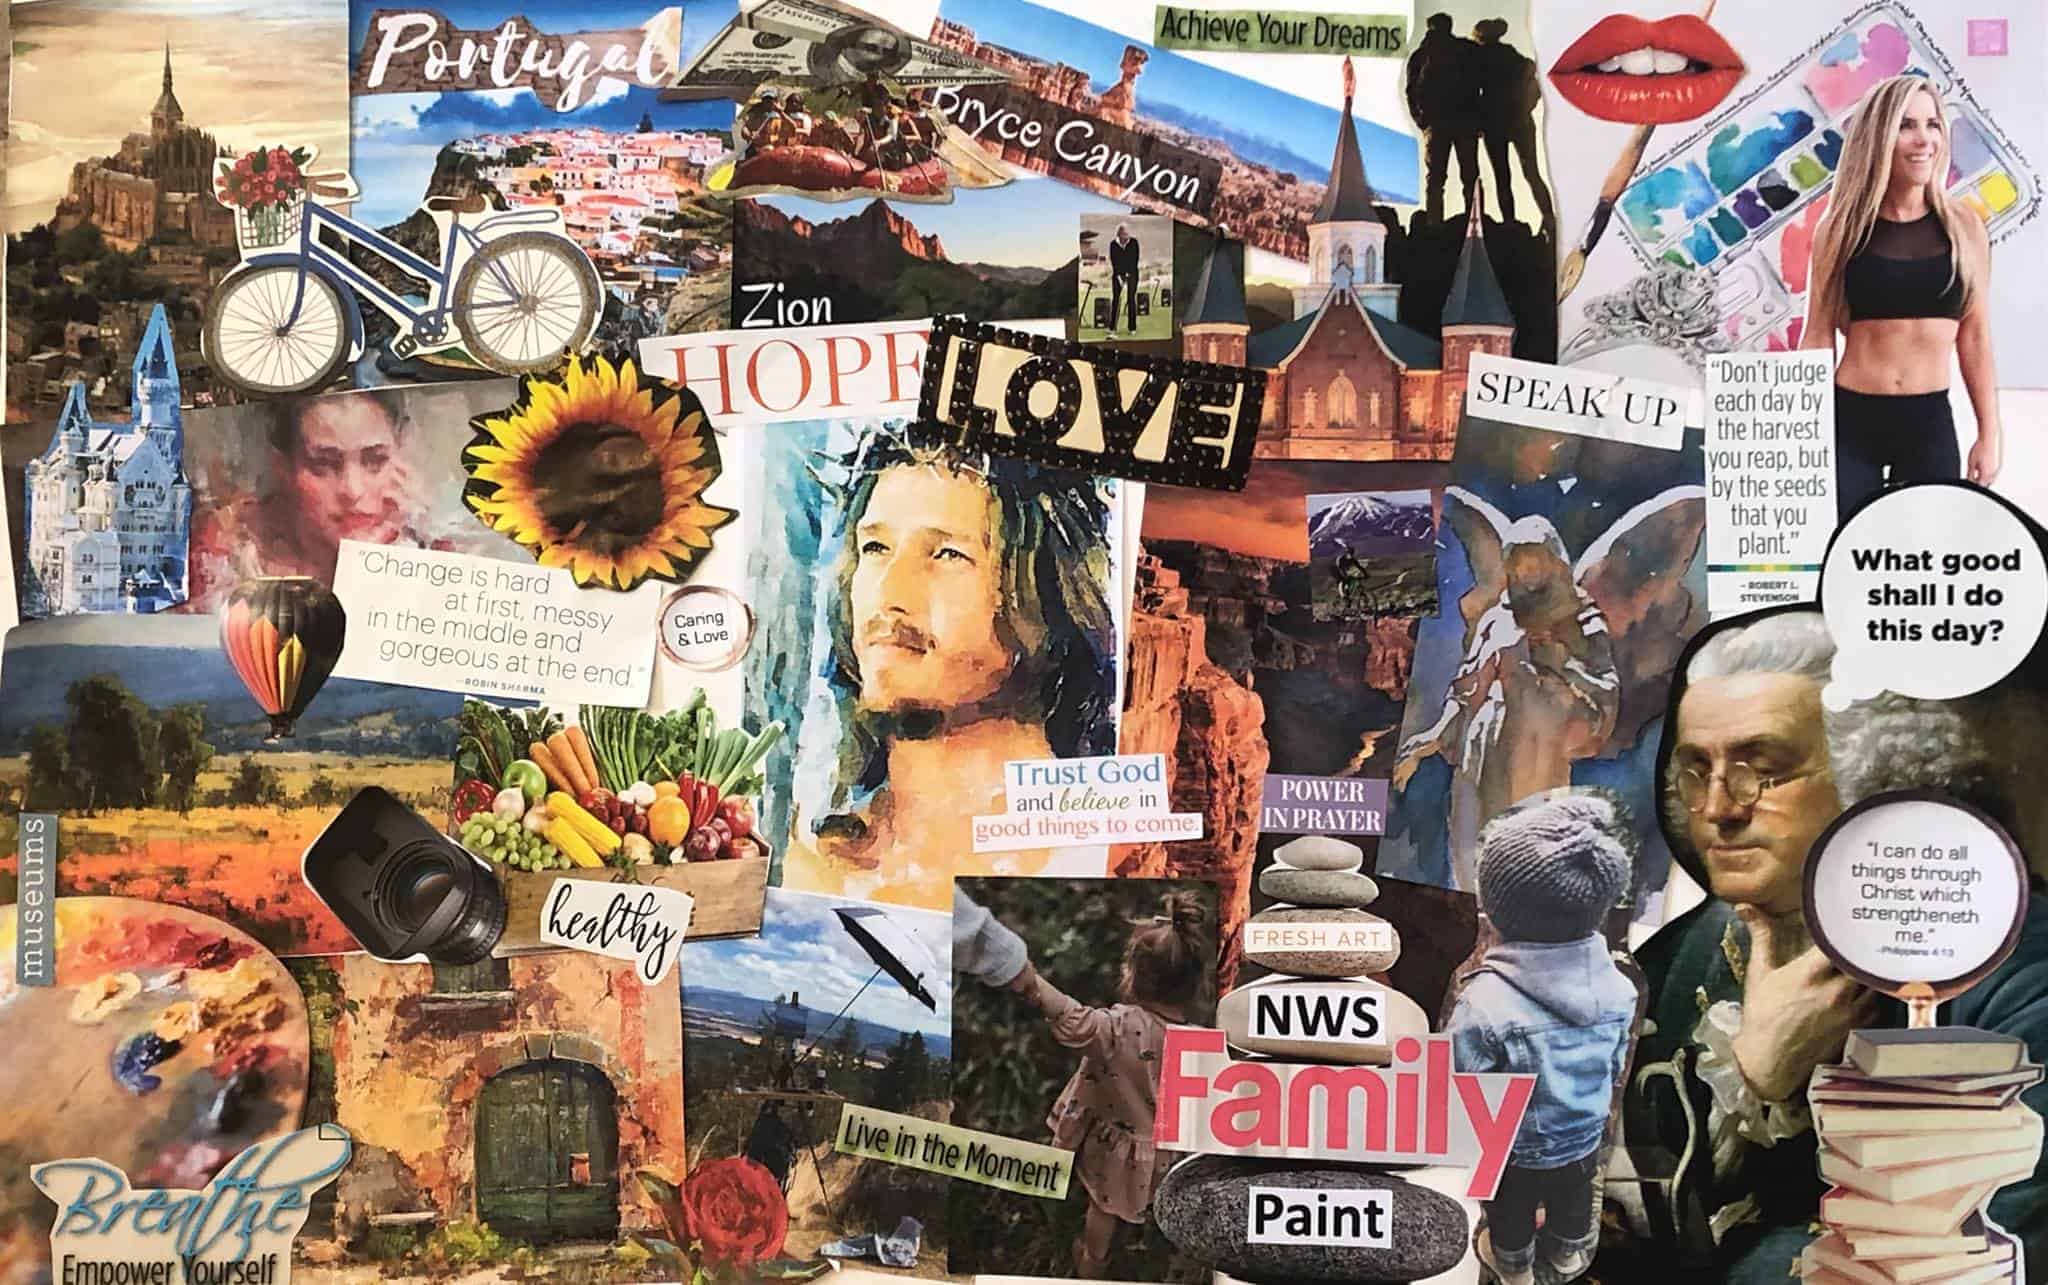 Example of a vision board.